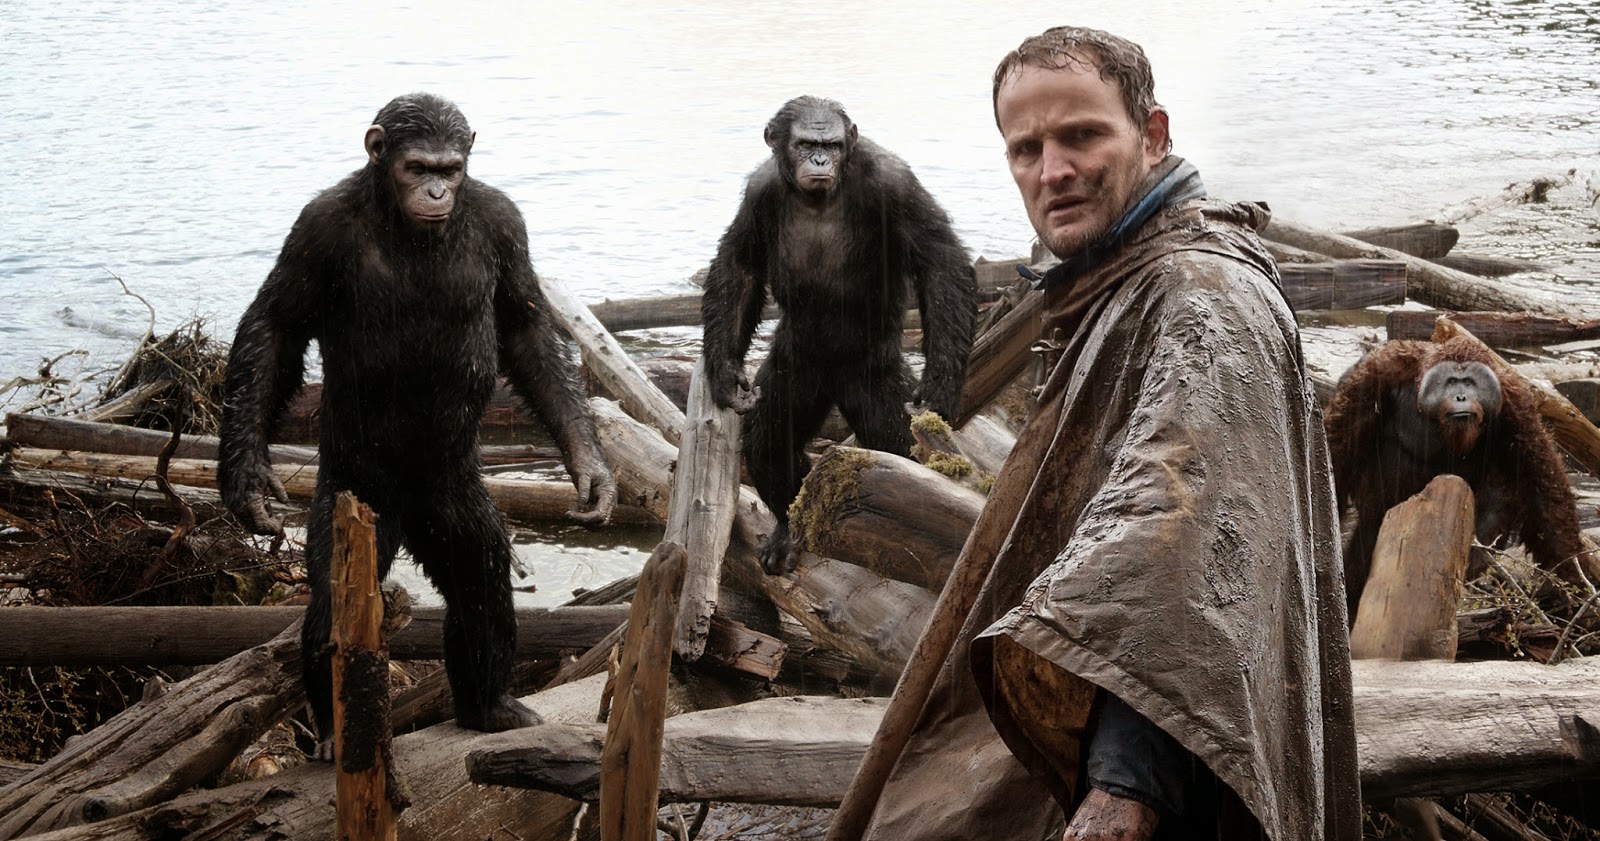 Film Review: Dawn of the Planet of the Apes (Matt Reeves, 2014) ★★★★